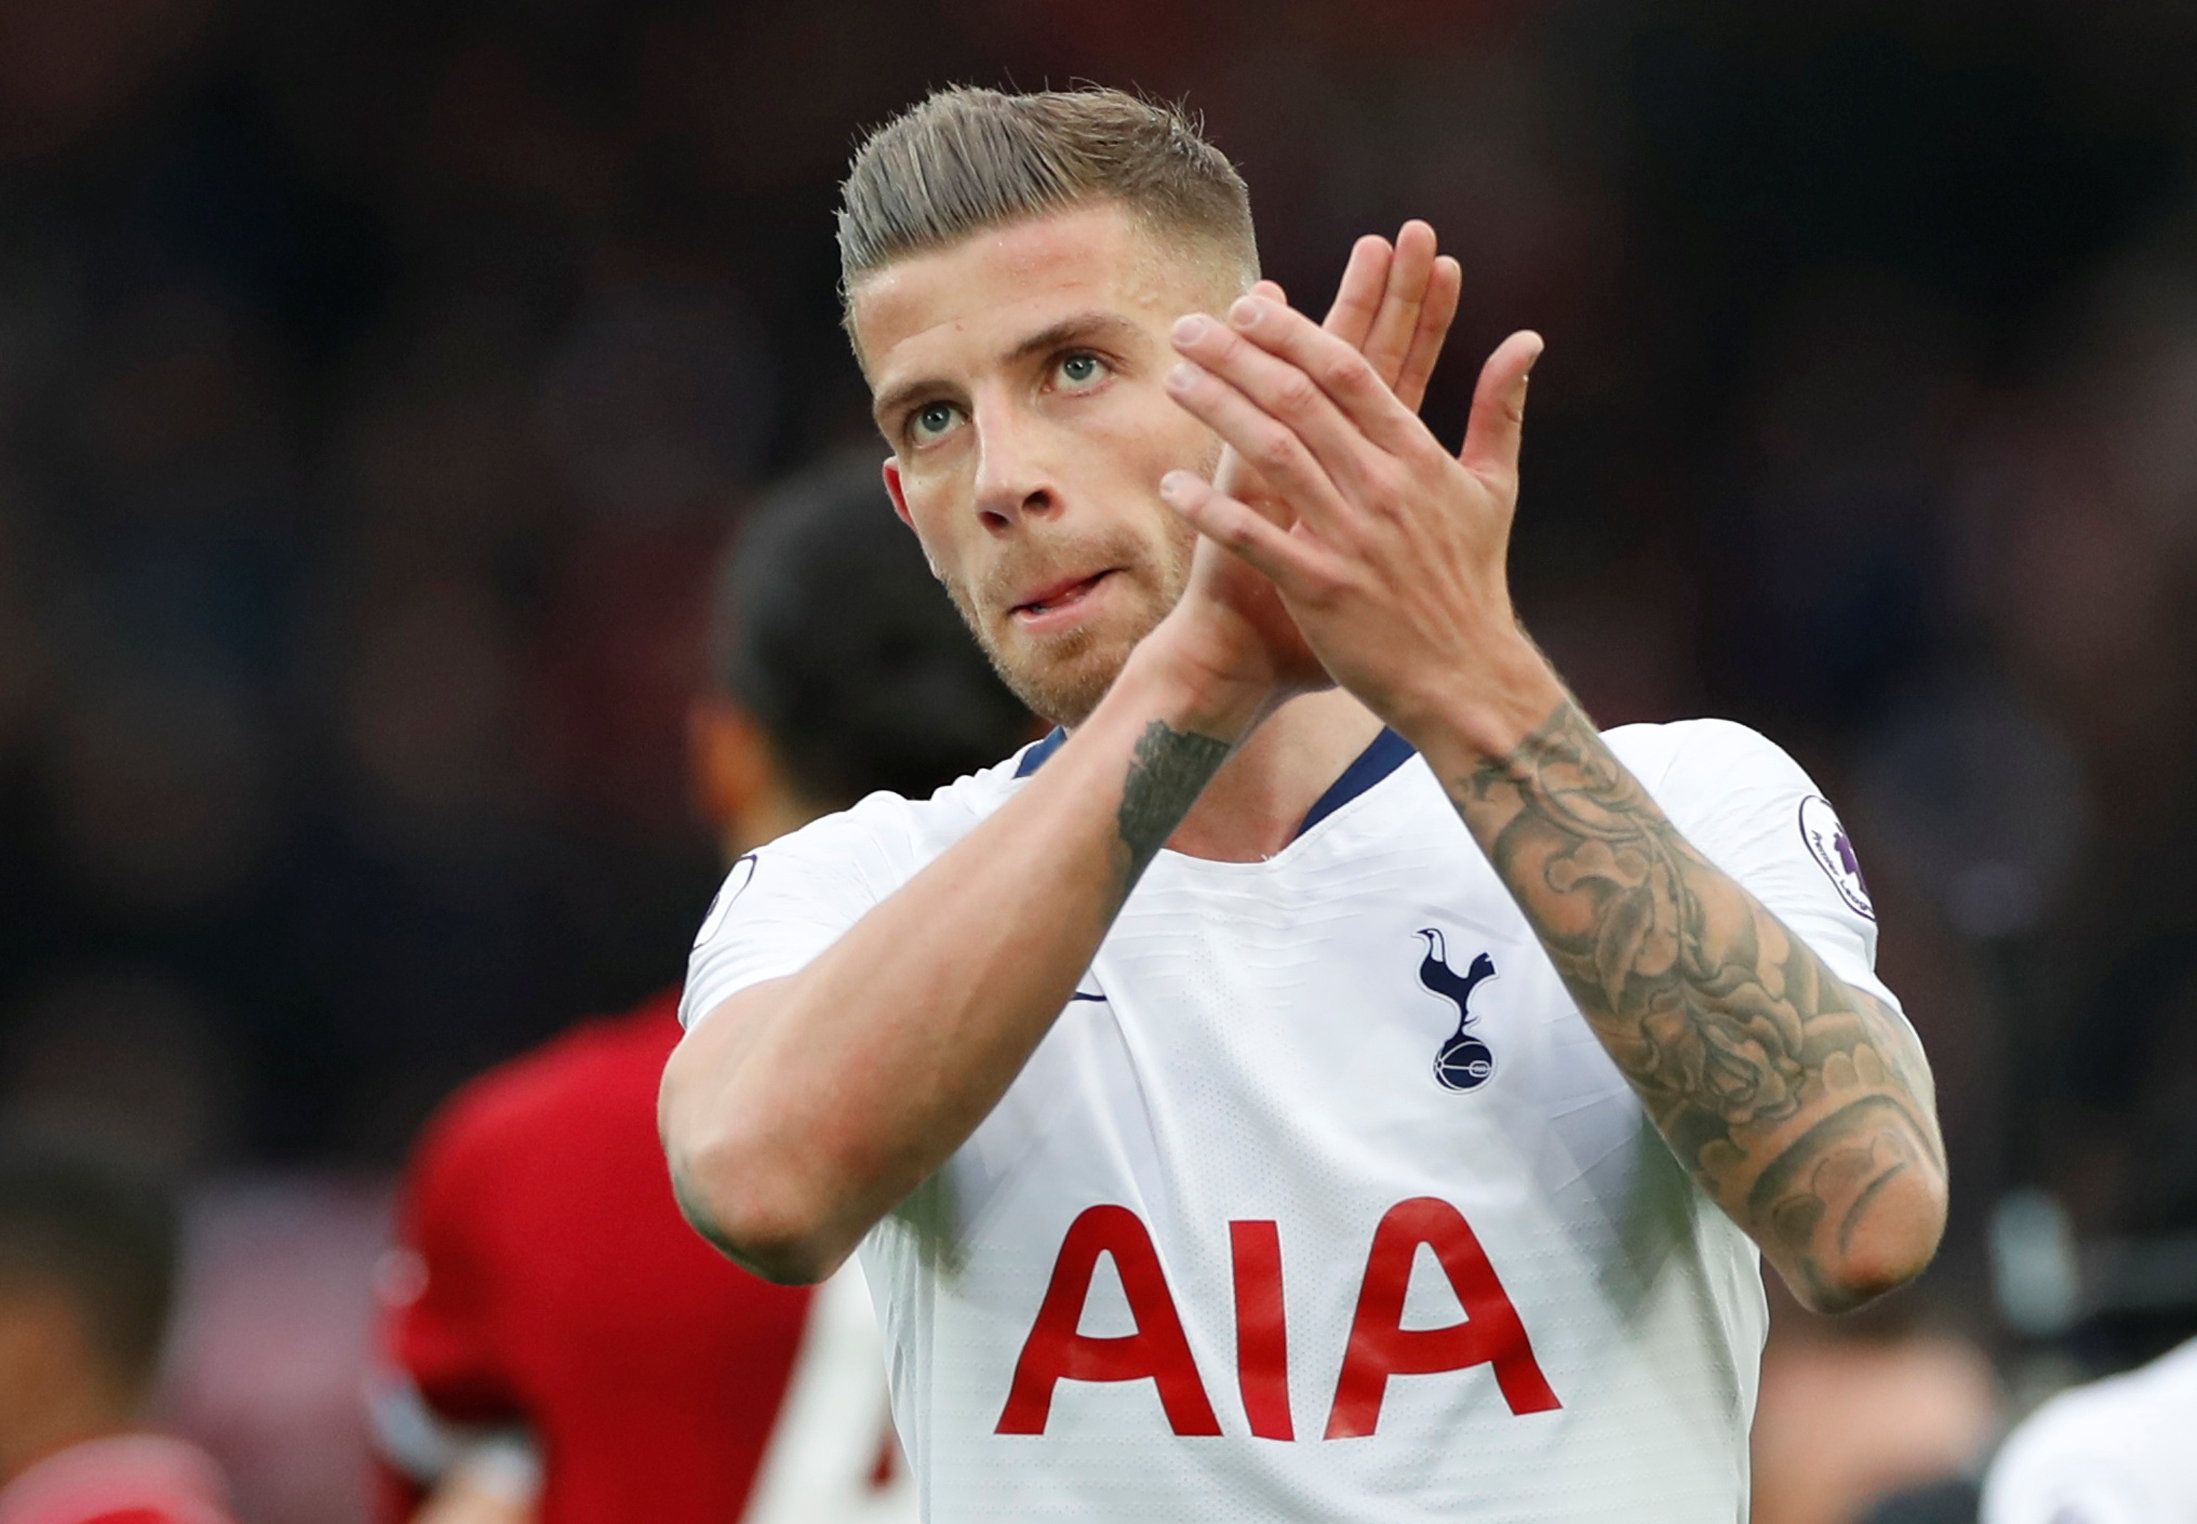 Soccer Football - Premier League - Liverpool v Tottenham Hotspur - Anfield, Liverpool, Britain - March 31, 2019  Tottenham's Toby Alderweireld applauds fans after the match                     Action Images via Reuters/Paul Childs  EDITORIAL USE ONLY. No use with unauthorized audio, video, data, fixture lists, club/league logos or 